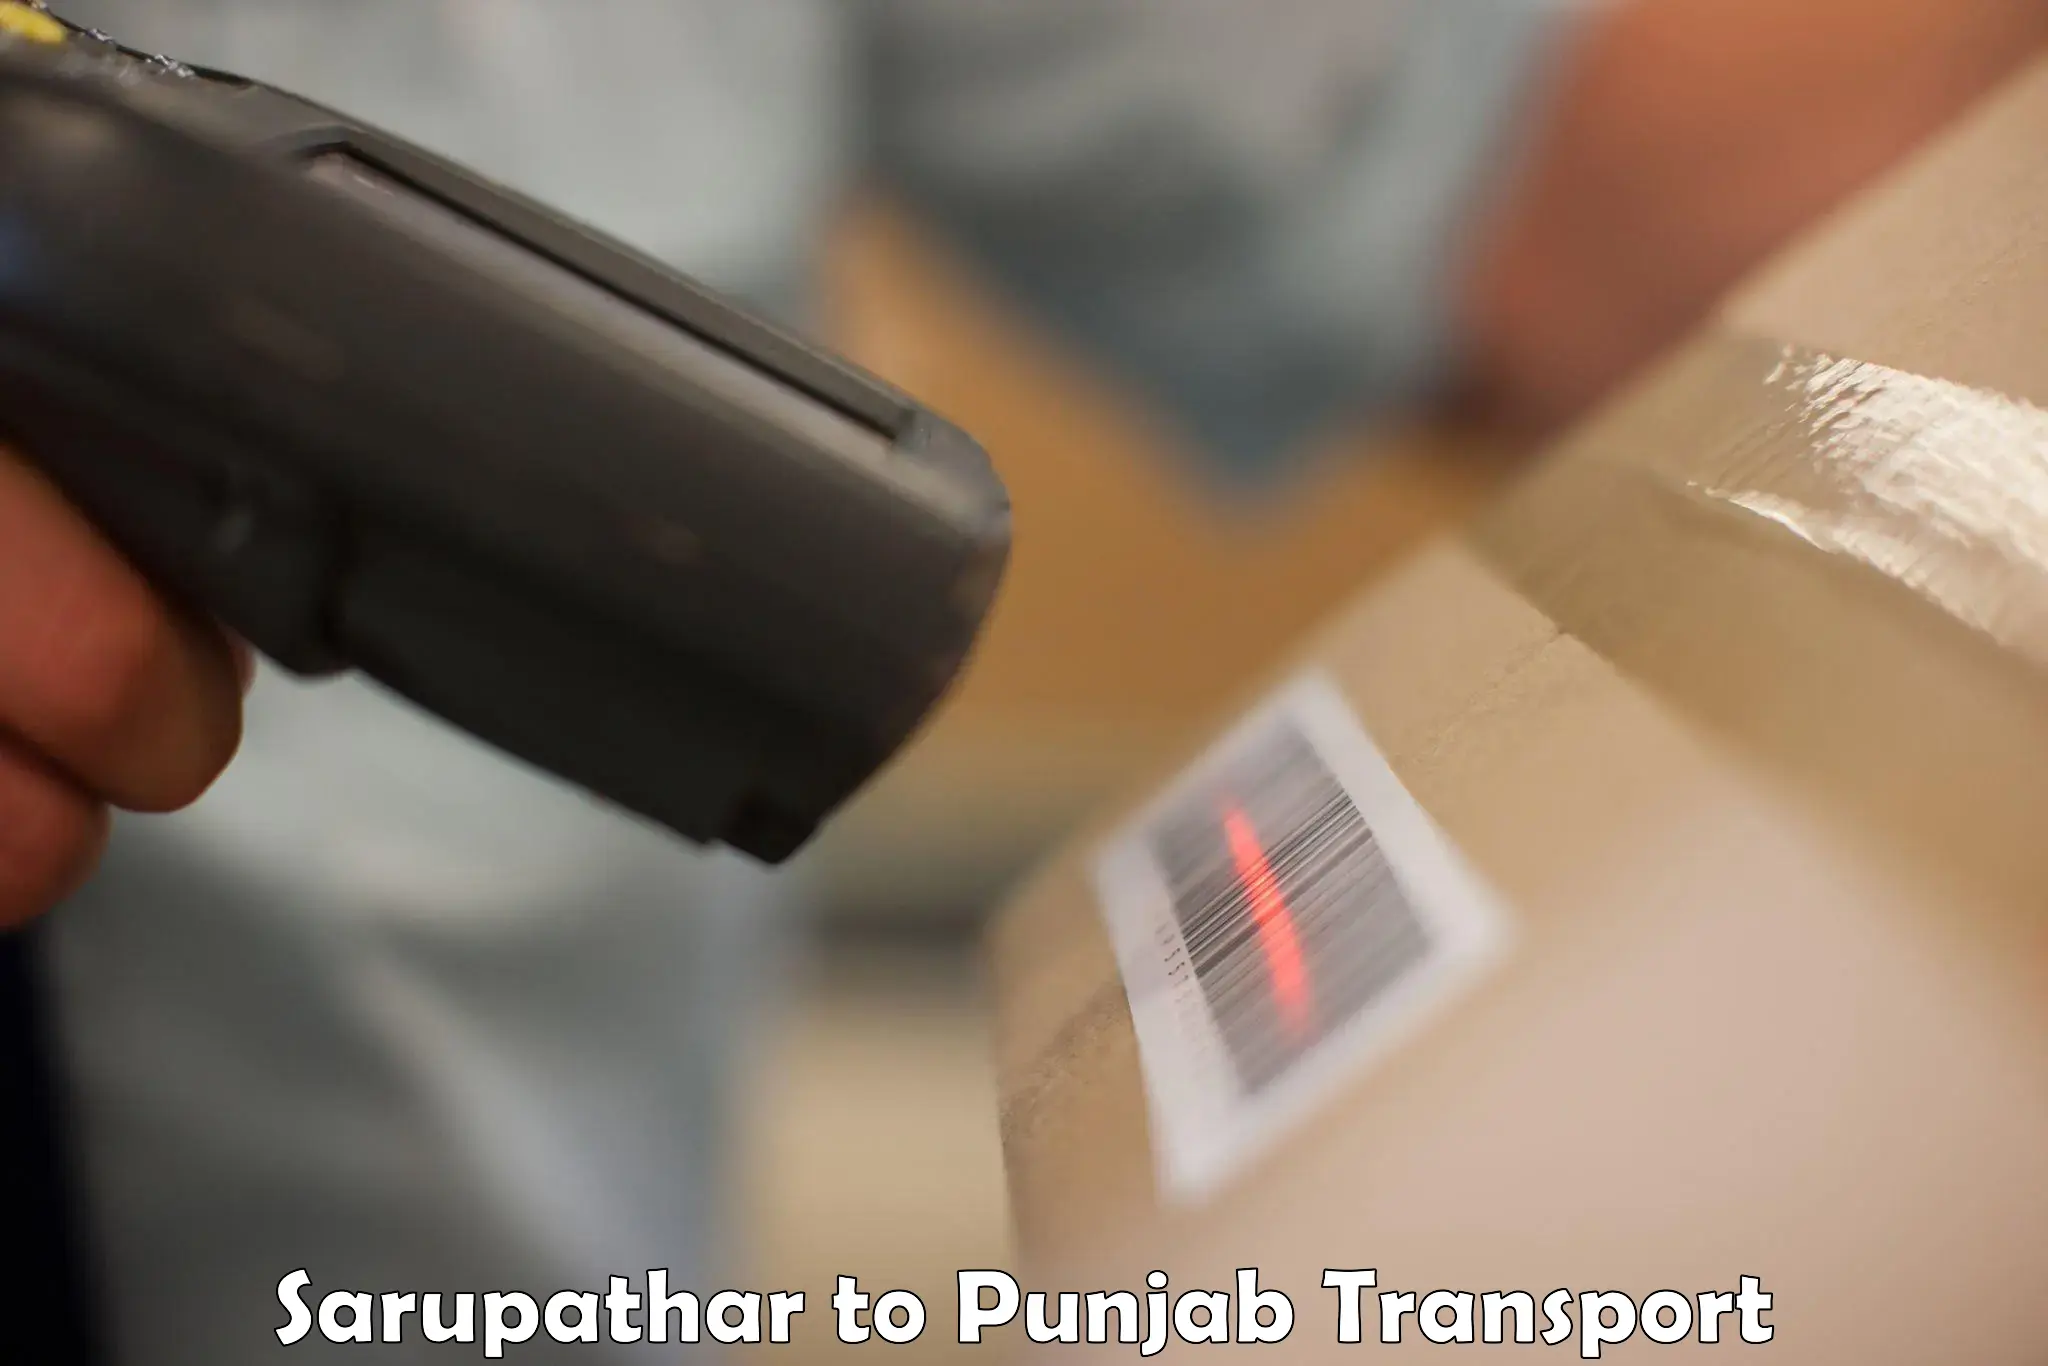 Container transport service Sarupathar to Pathankot